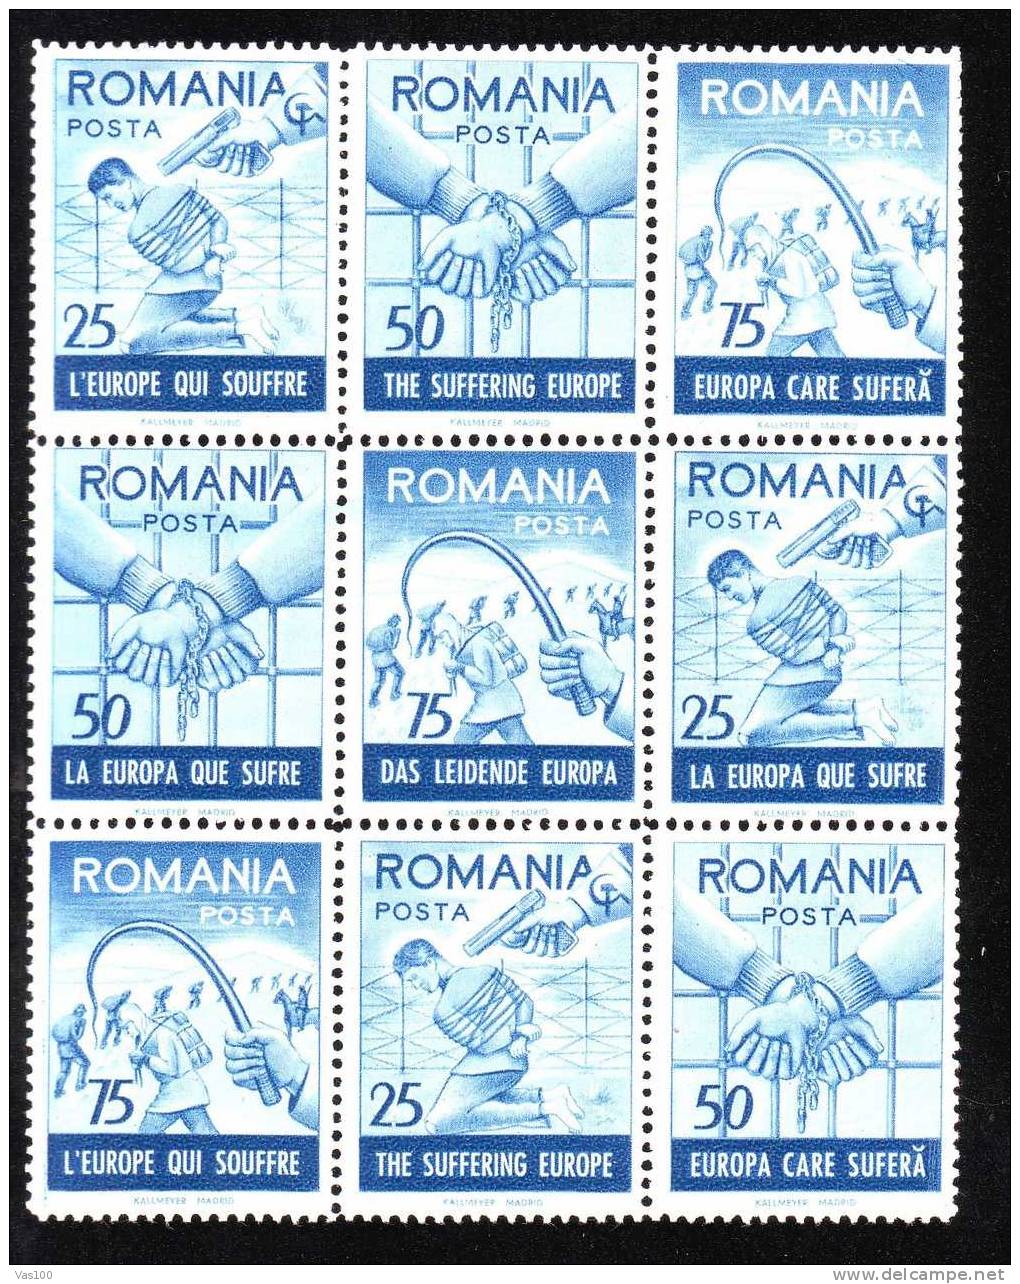 Romania  - Exiles 1958 THE SUFERING EUROPE ,minisheet Blue 9 Stamps MNH. - Local Post Stamps